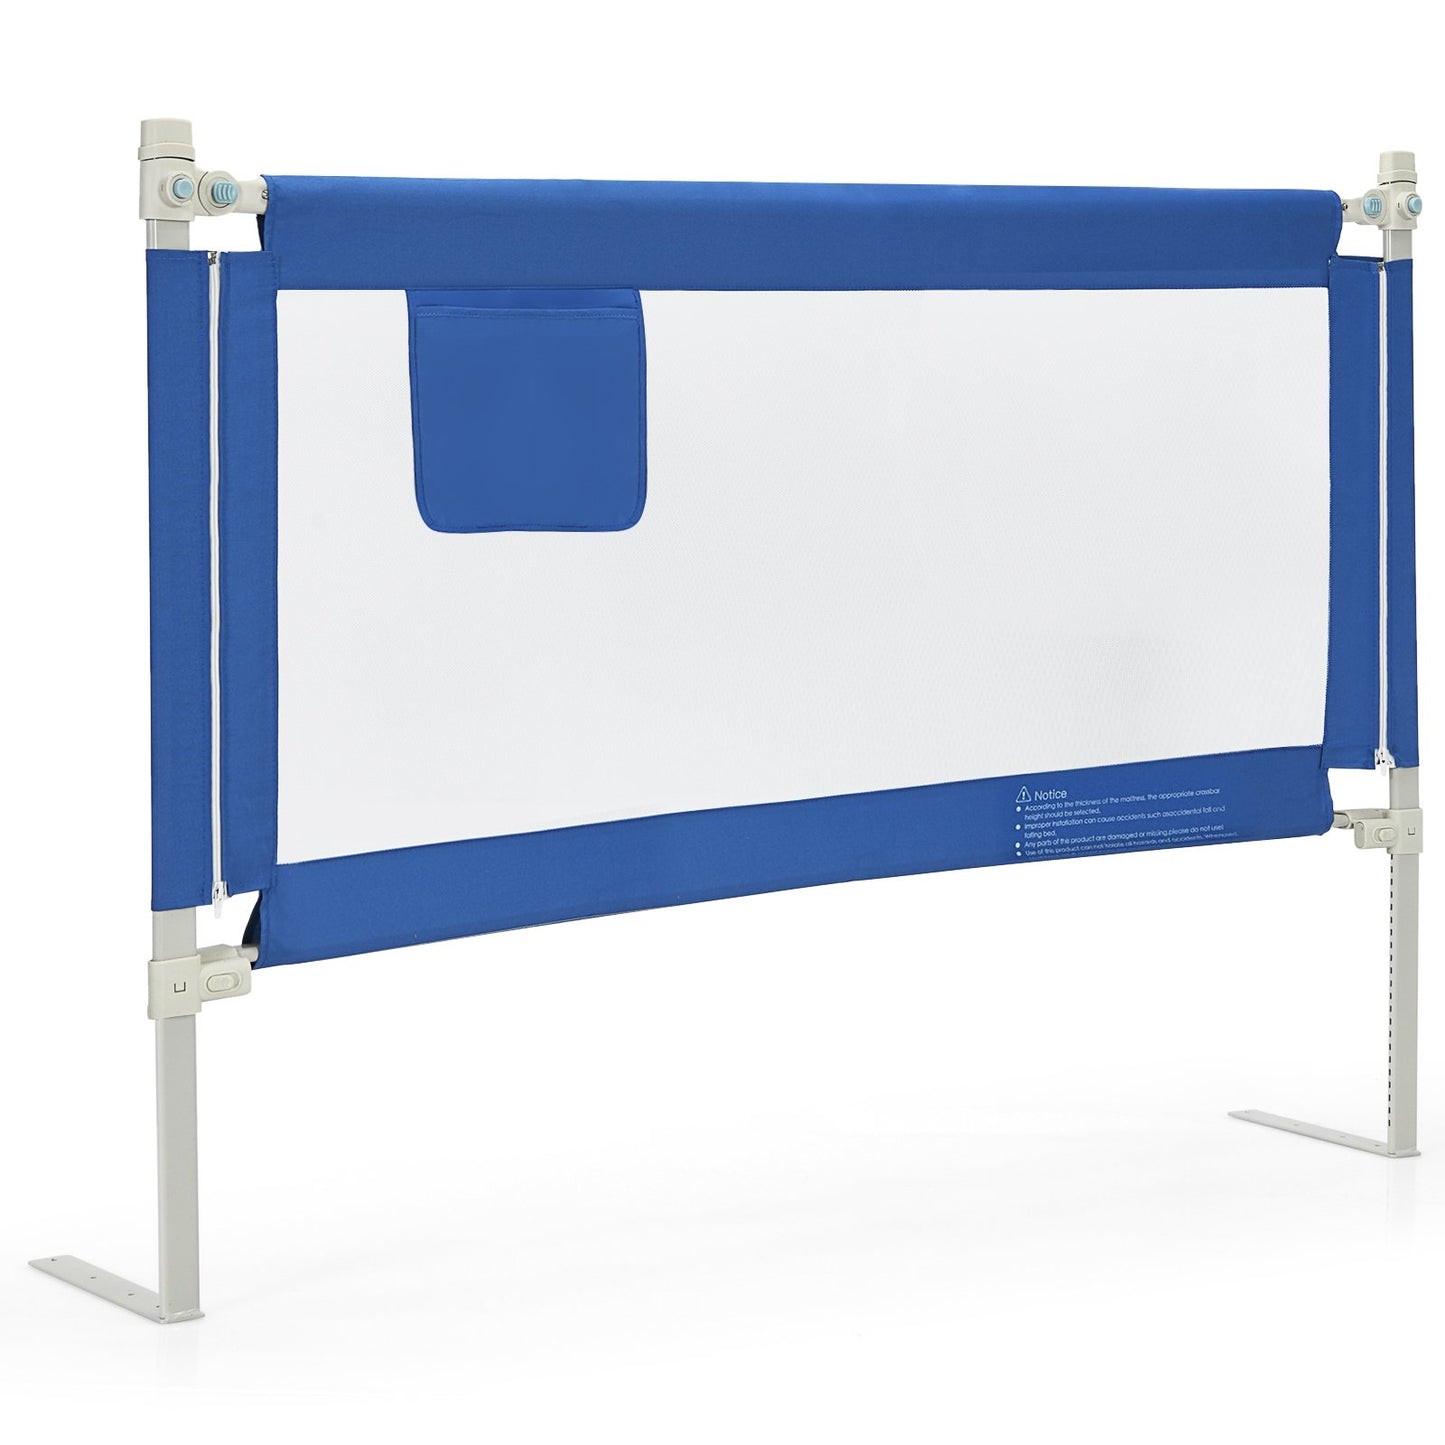 57 Inch Toddlers Vertical Lifting Baby Bed Rail Guard with Lock, Blue